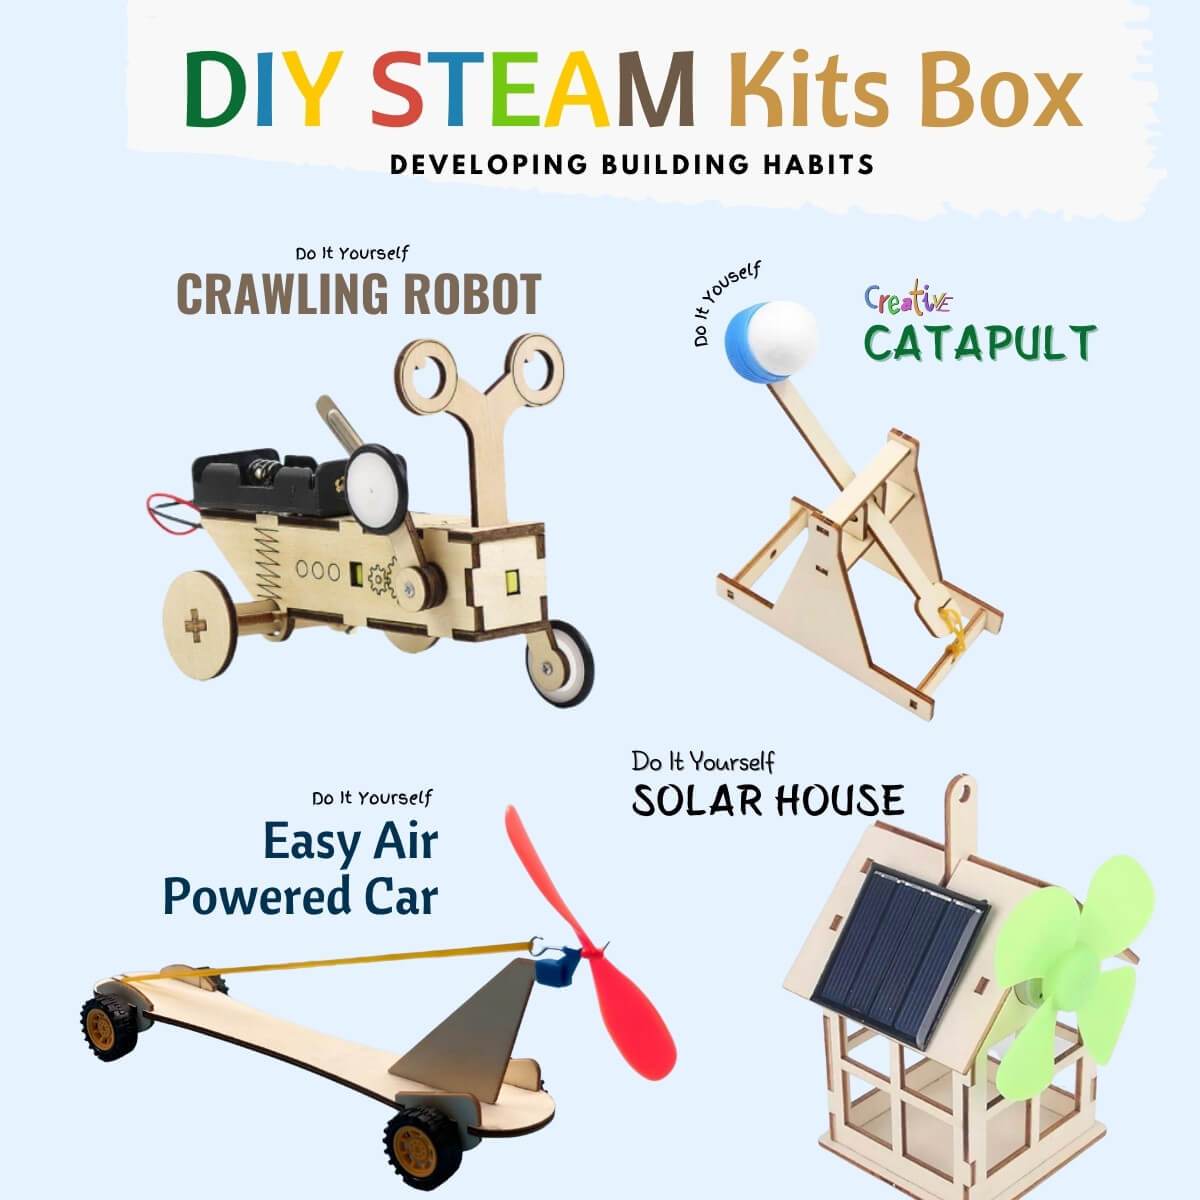 4 DIY STEAM Kits | Hands-On Activity Box | Age 8-99 Years - Inspirely Education Inc